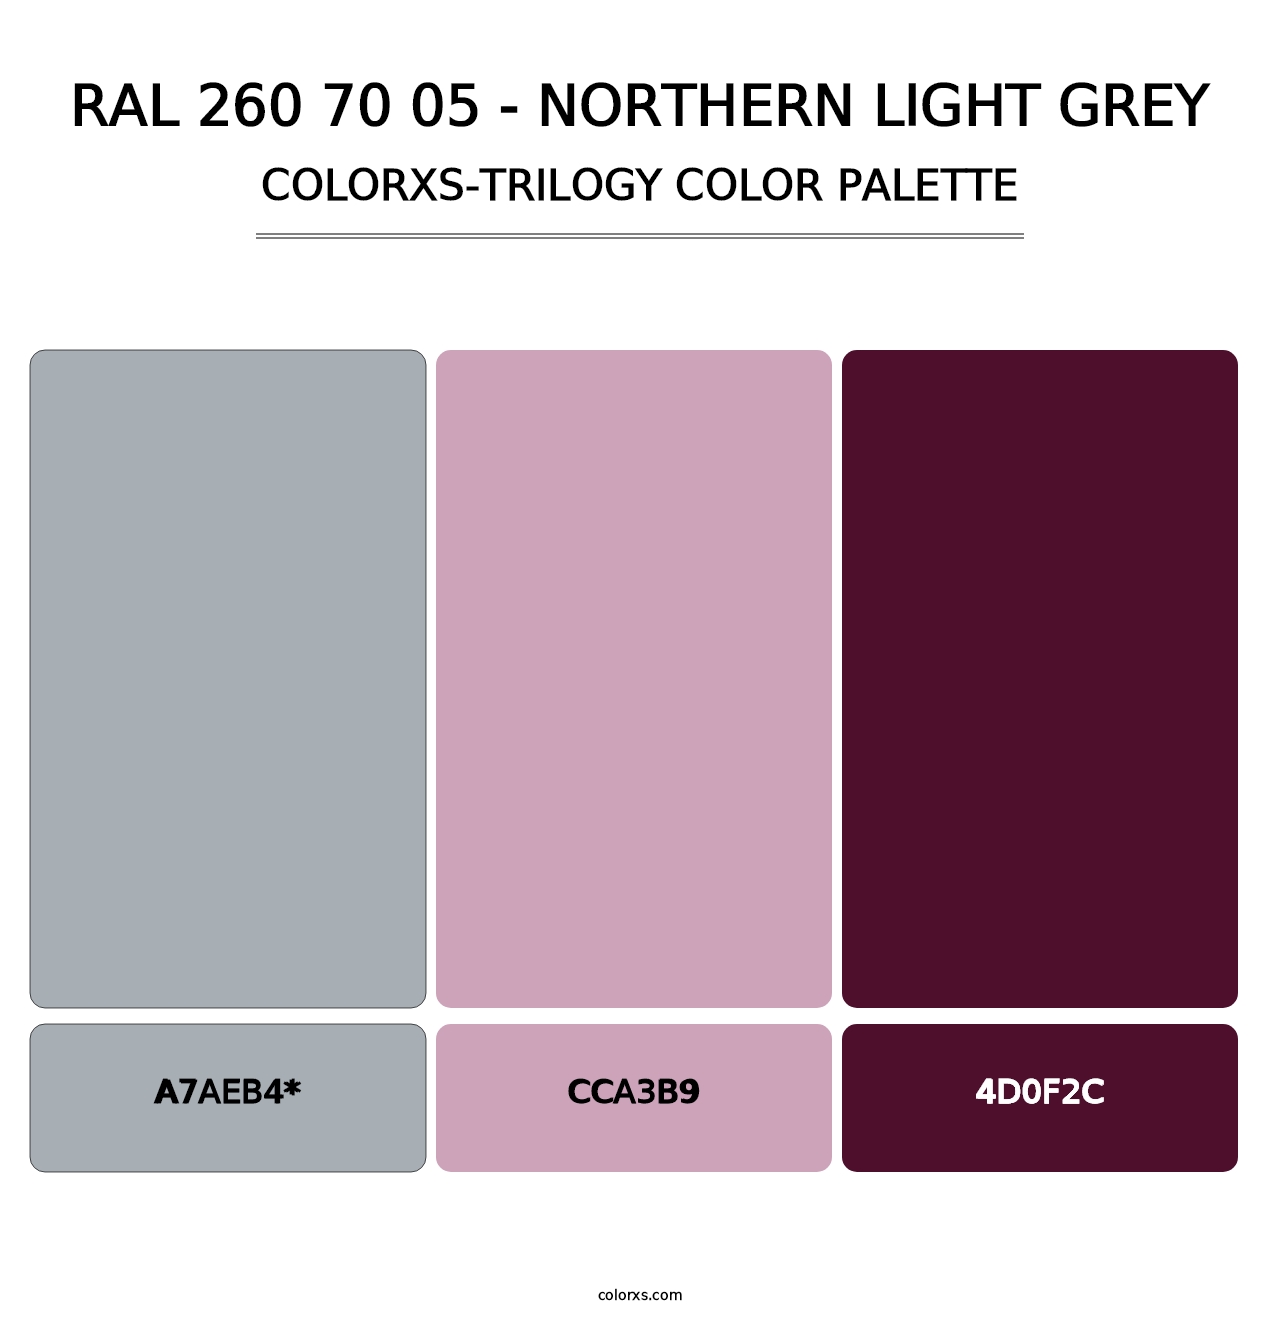 RAL 260 70 05 - Northern Light Grey - Colorxs Trilogy Palette